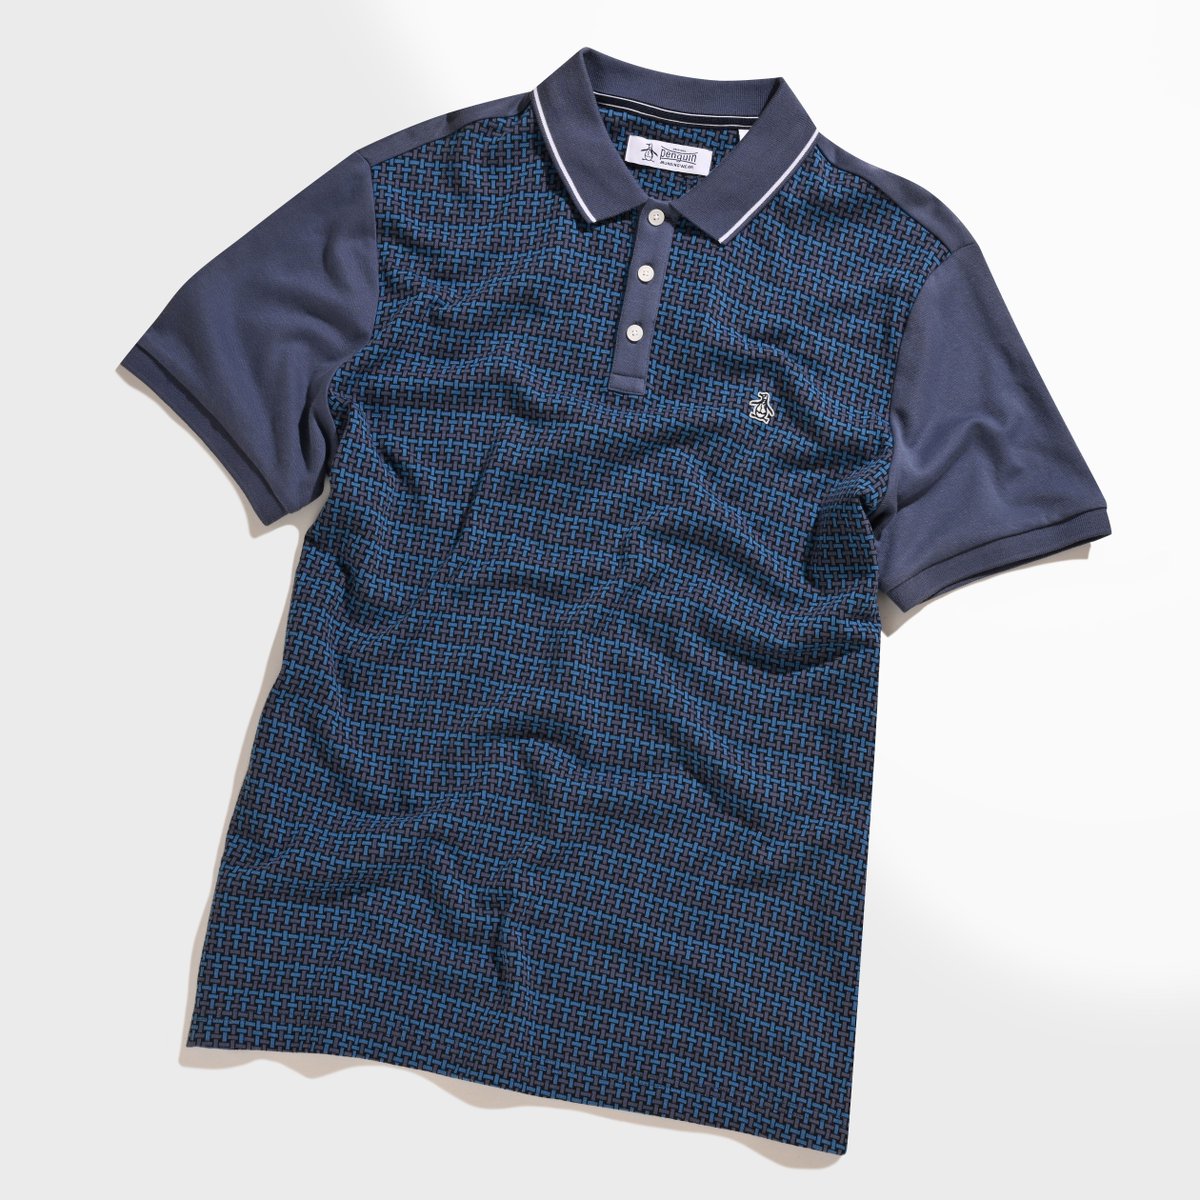 SS24 | Jacquard Polo featuring classic basketweave pattern. Available in Blue Indigo and Tourmaline. bit.ly/3TwYGFB

#OriginalGoodTime🐧